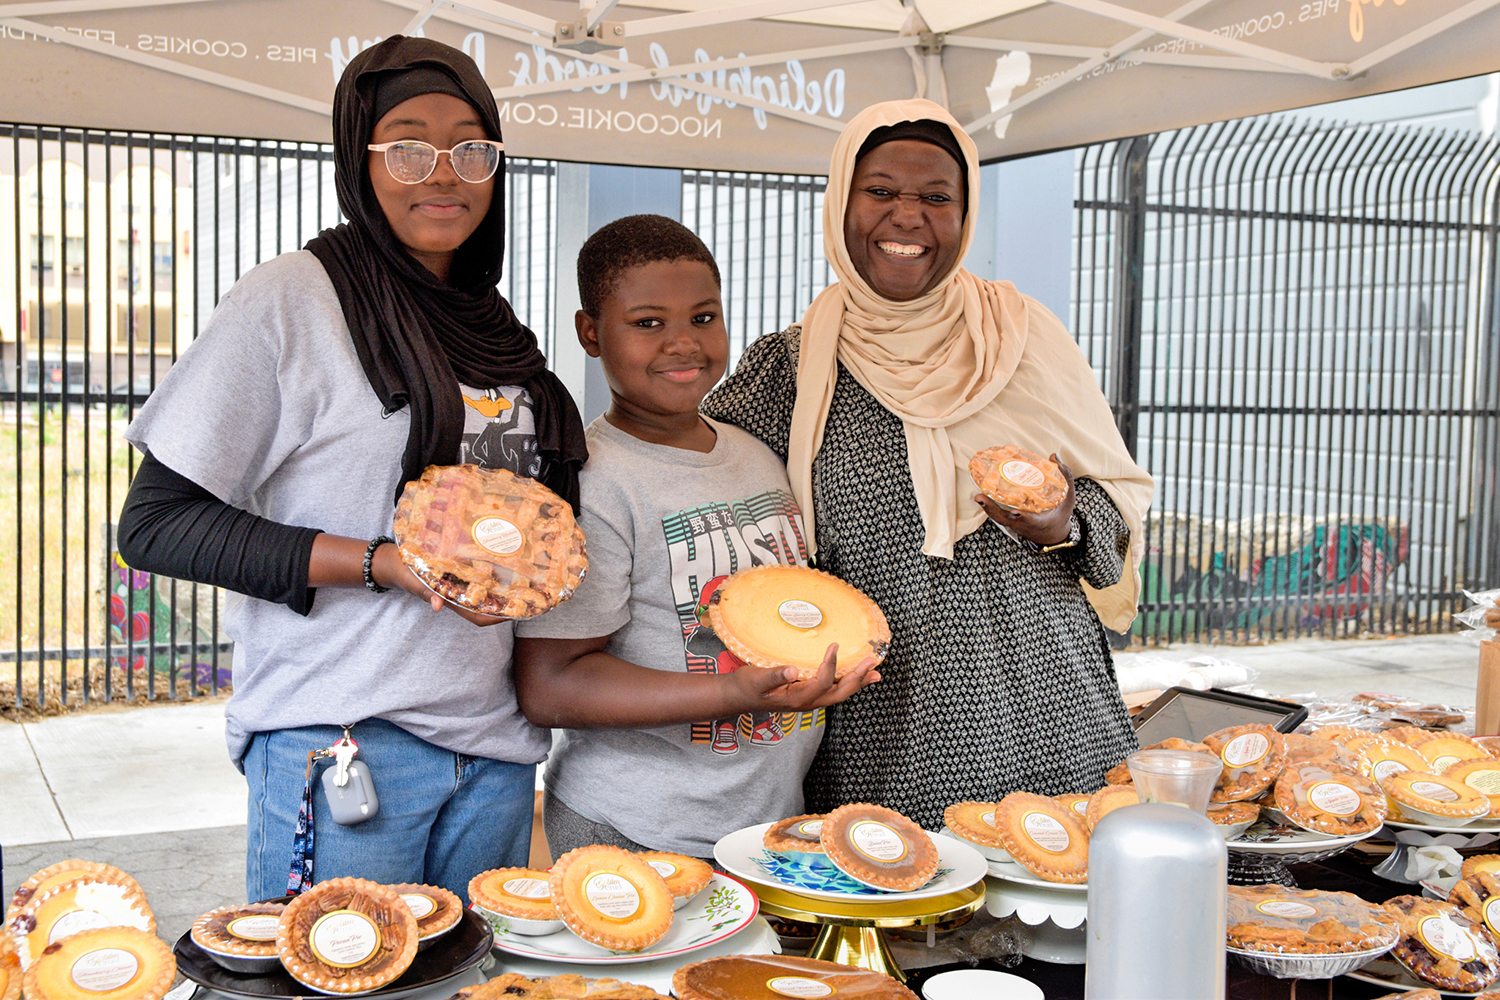 Three people, including Rafia Sabir, hold pies and pose at Delightful Foods' stand at the Mission Community Market in San Francisco.